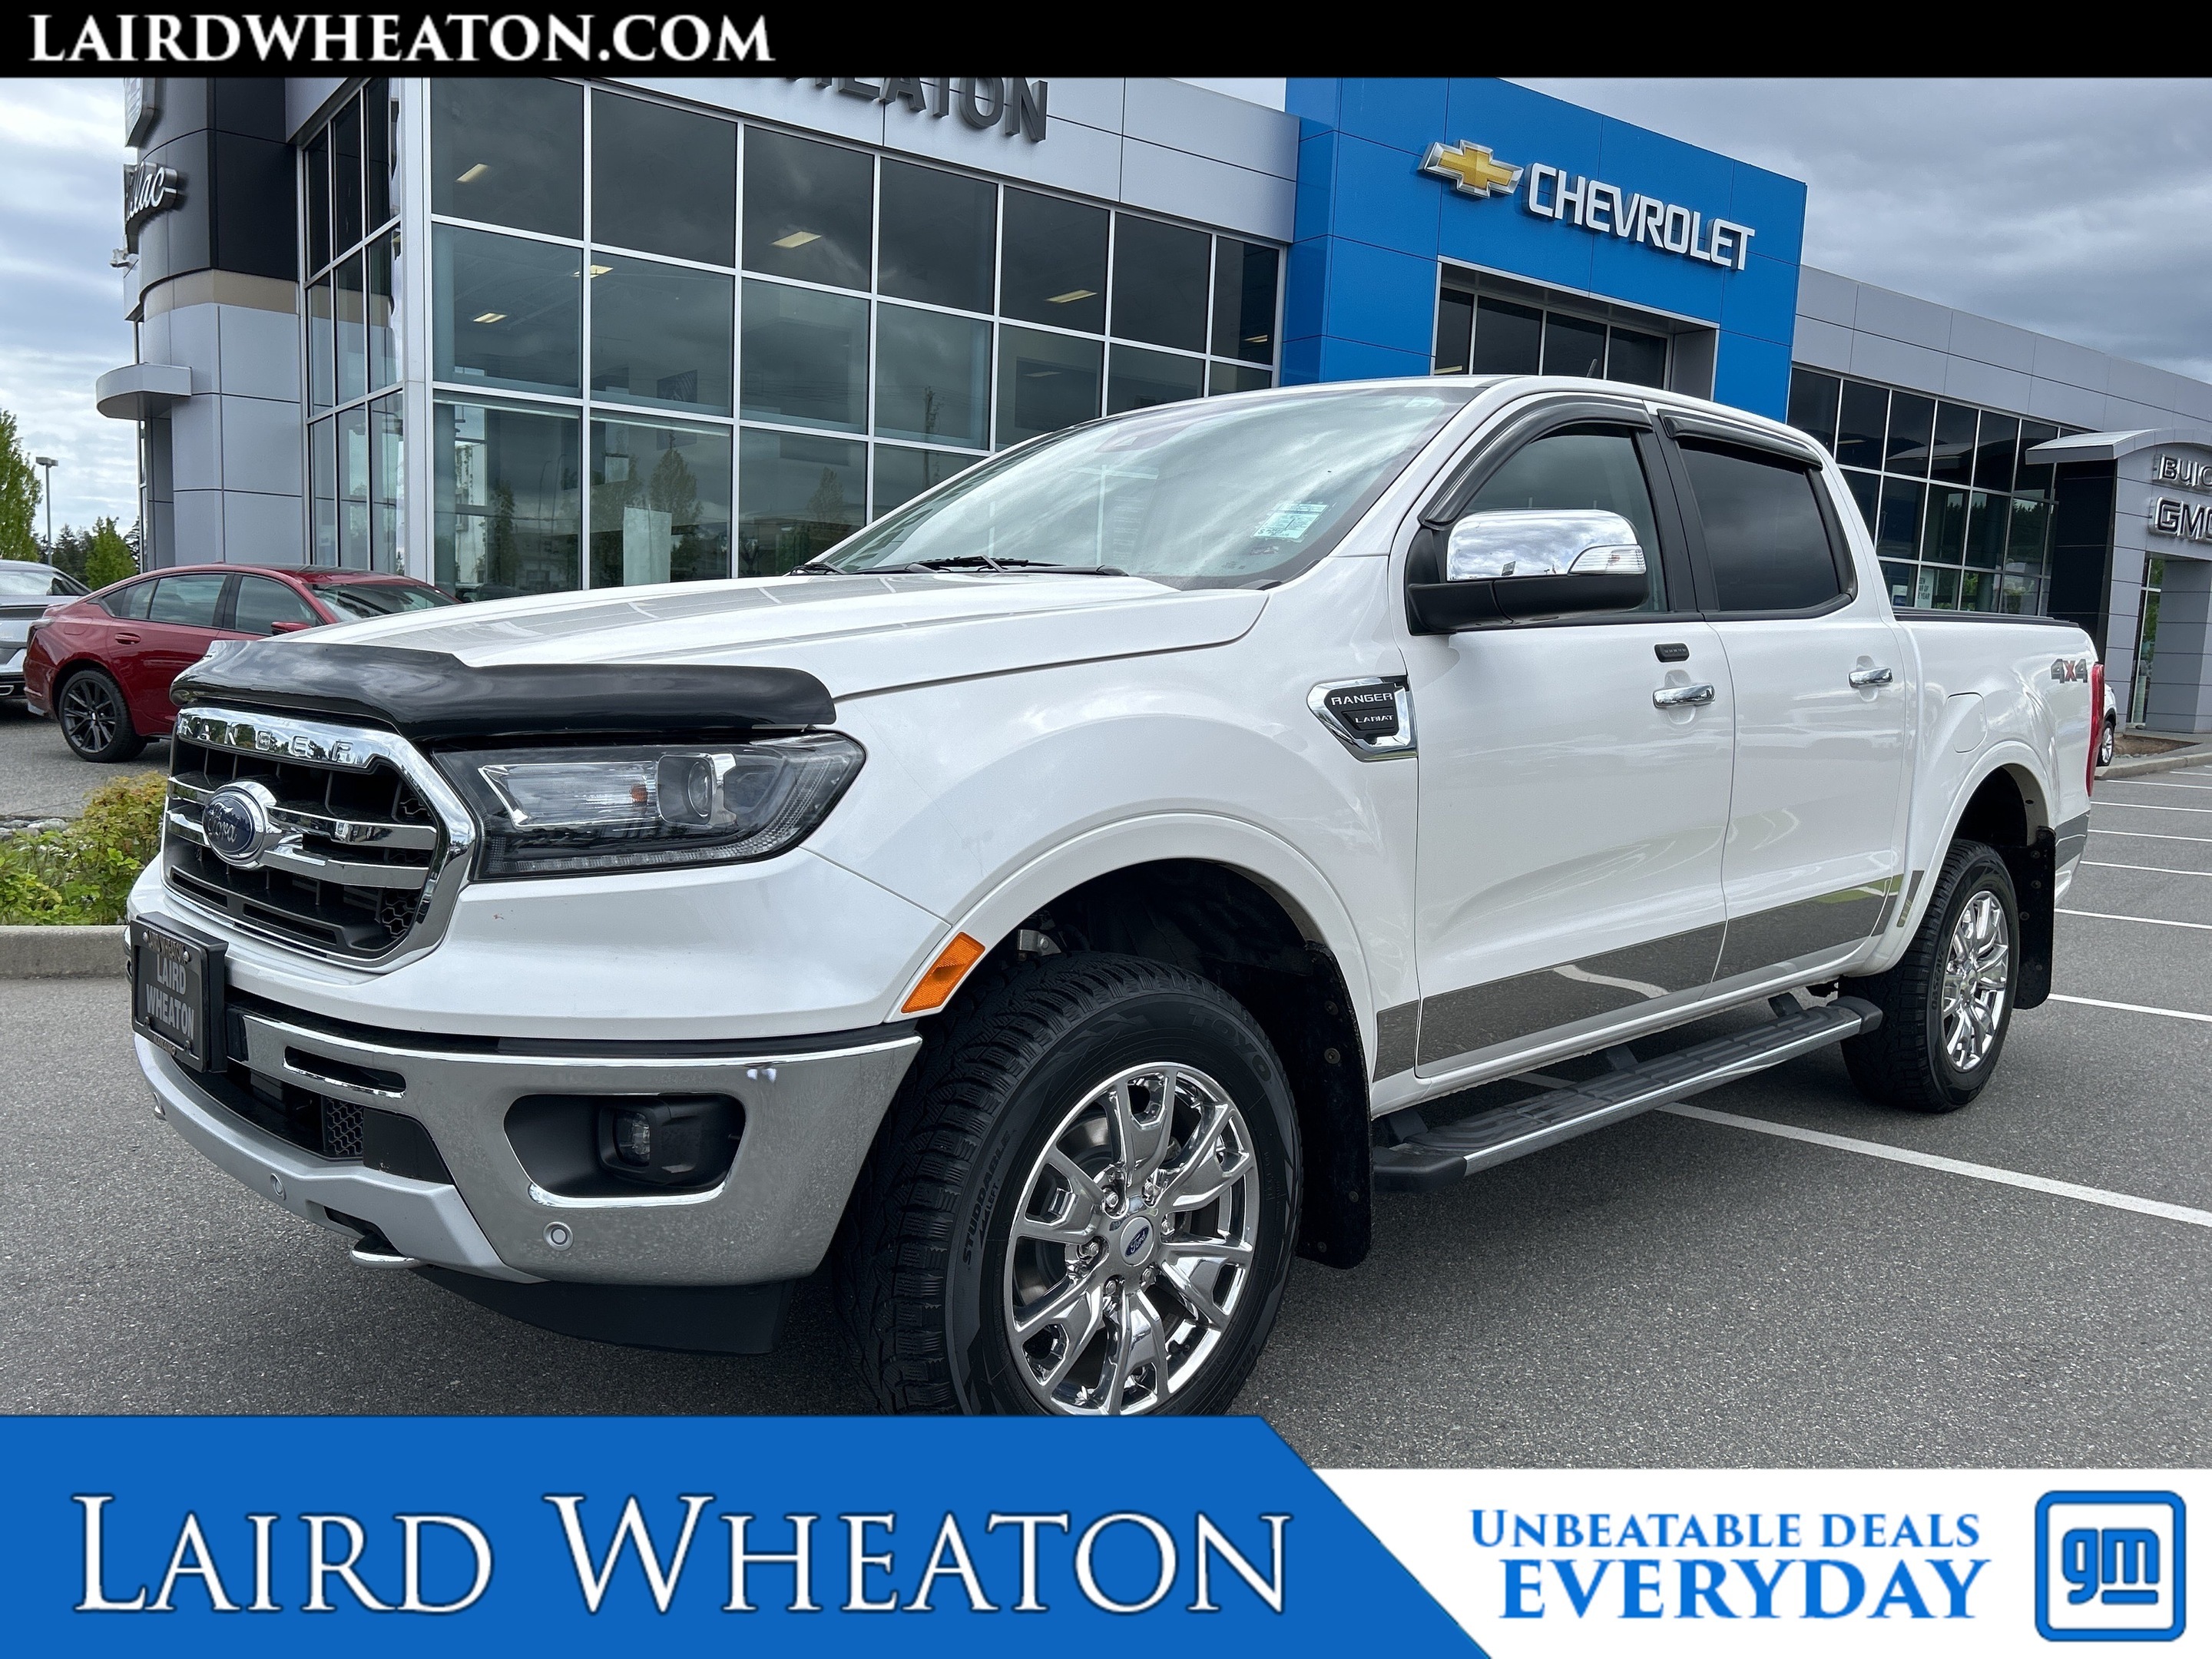 2019 Ford Ranger Lariat 4X4, Leather, Great Safety Features